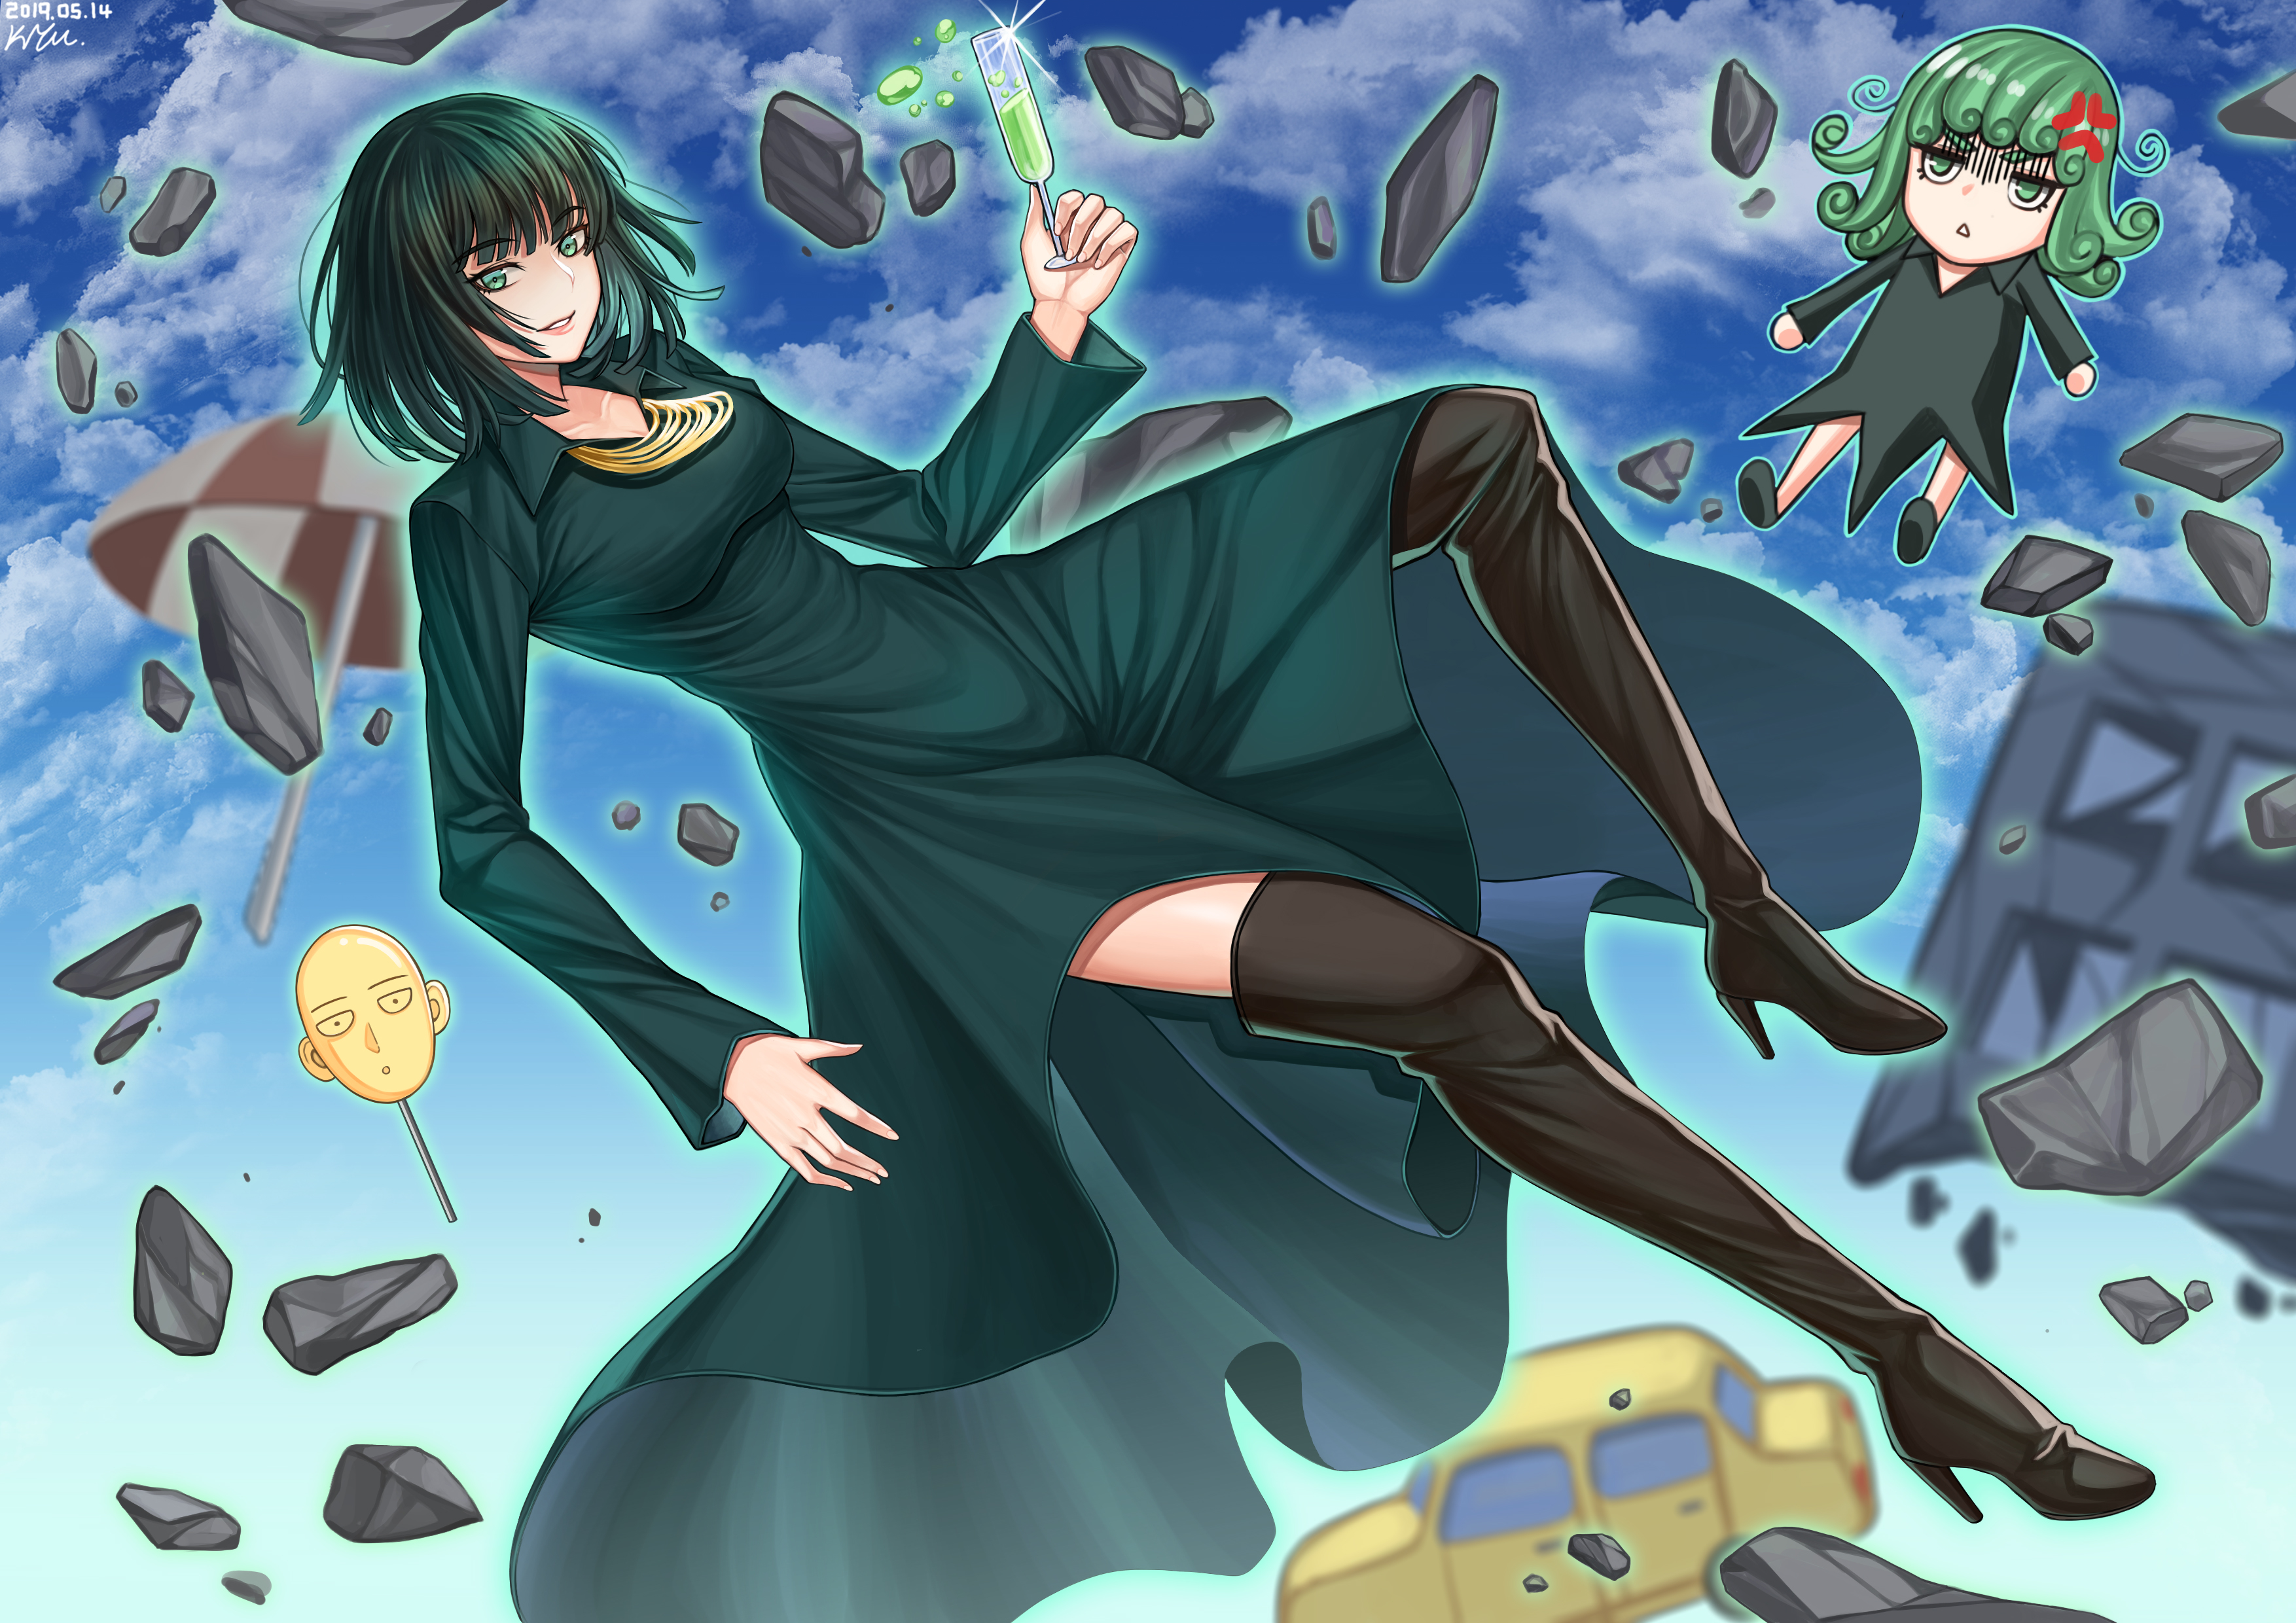 Fubuki One Punch Man Wallpaper, Hd Anime 4K Wallpapers, Images And